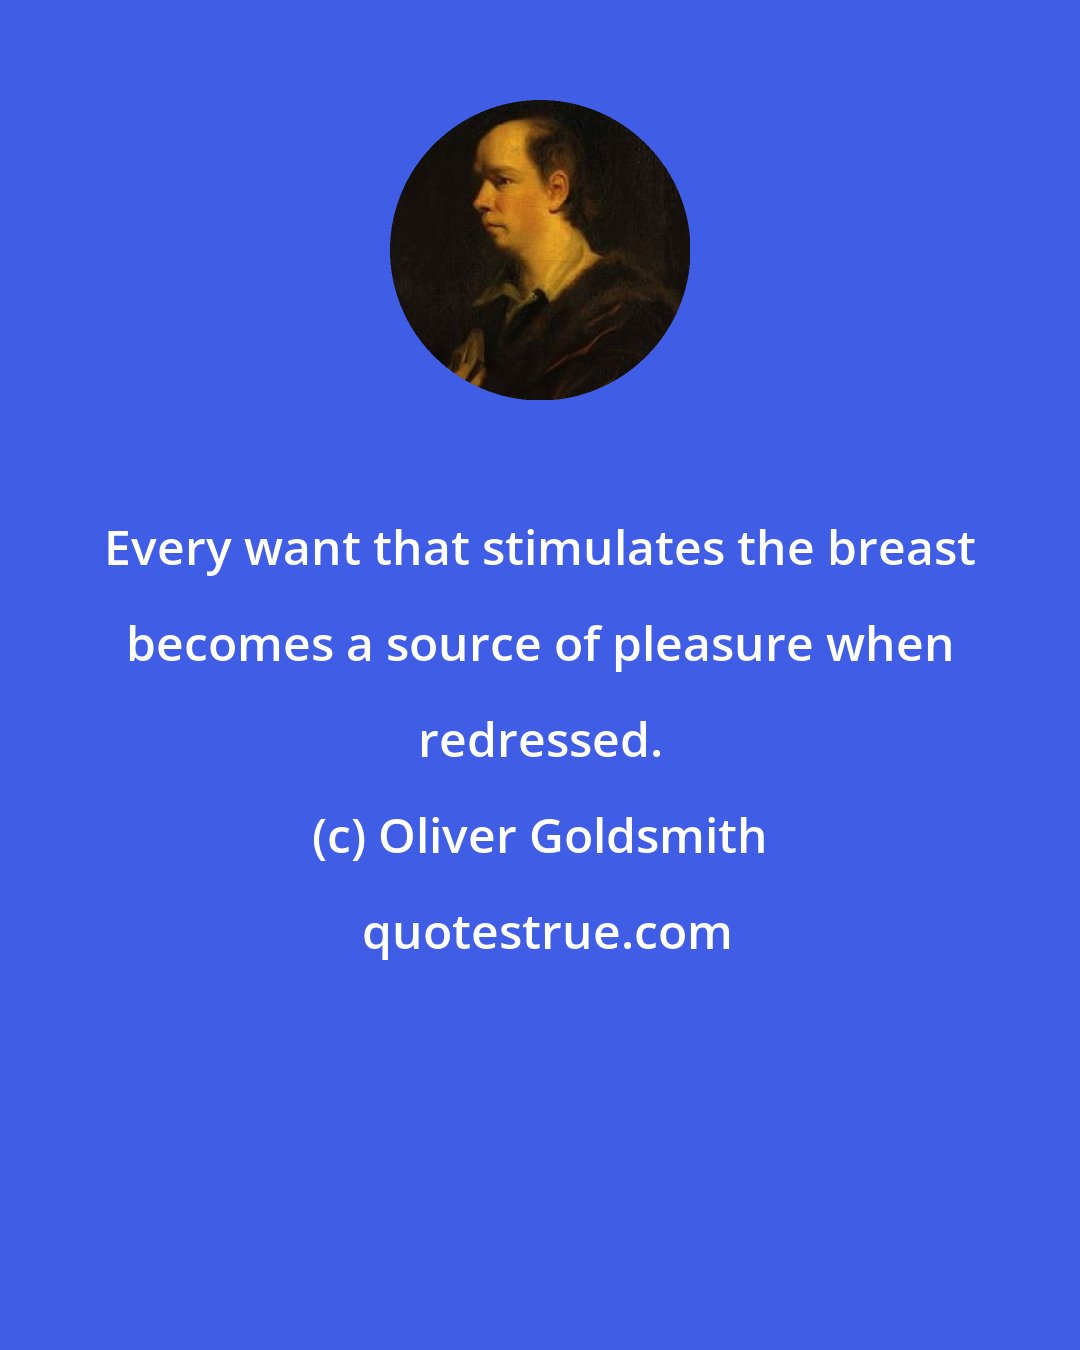 Oliver Goldsmith: Every want that stimulates the breast becomes a source of pleasure when redressed.